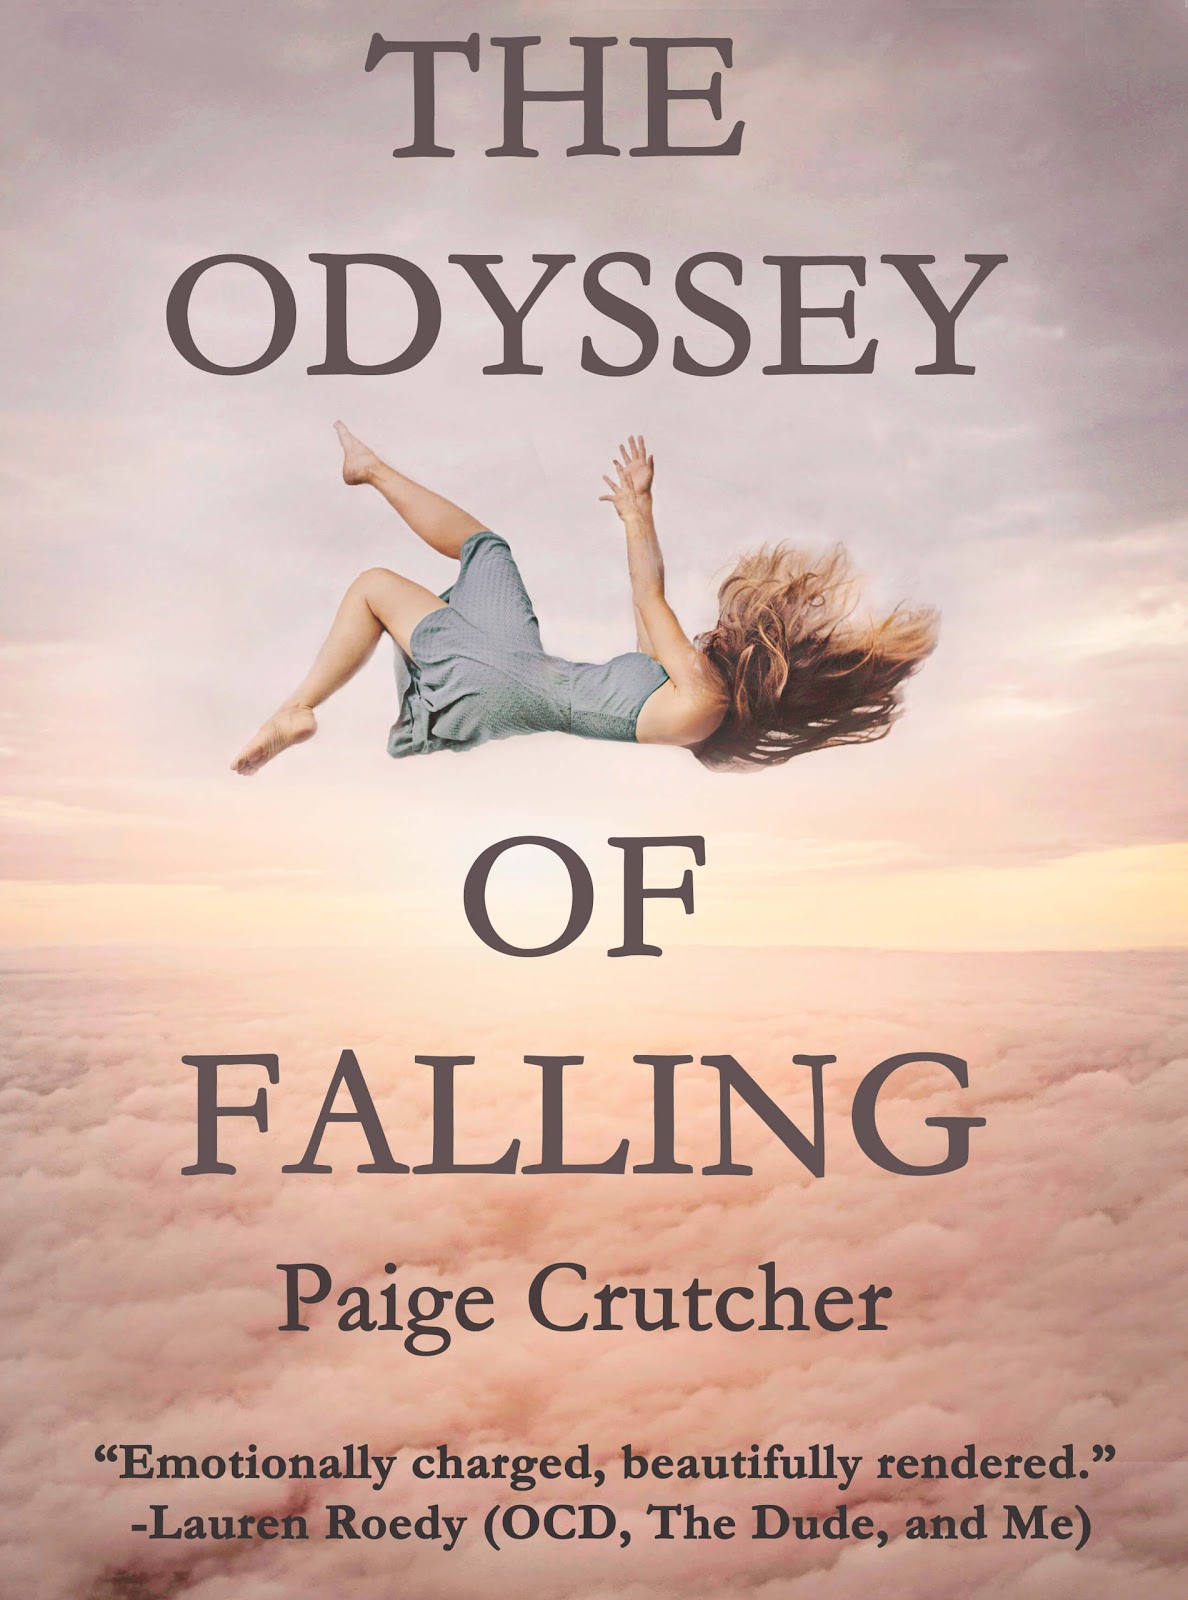 The Odyssey Of Falling (Paige Crutcher)